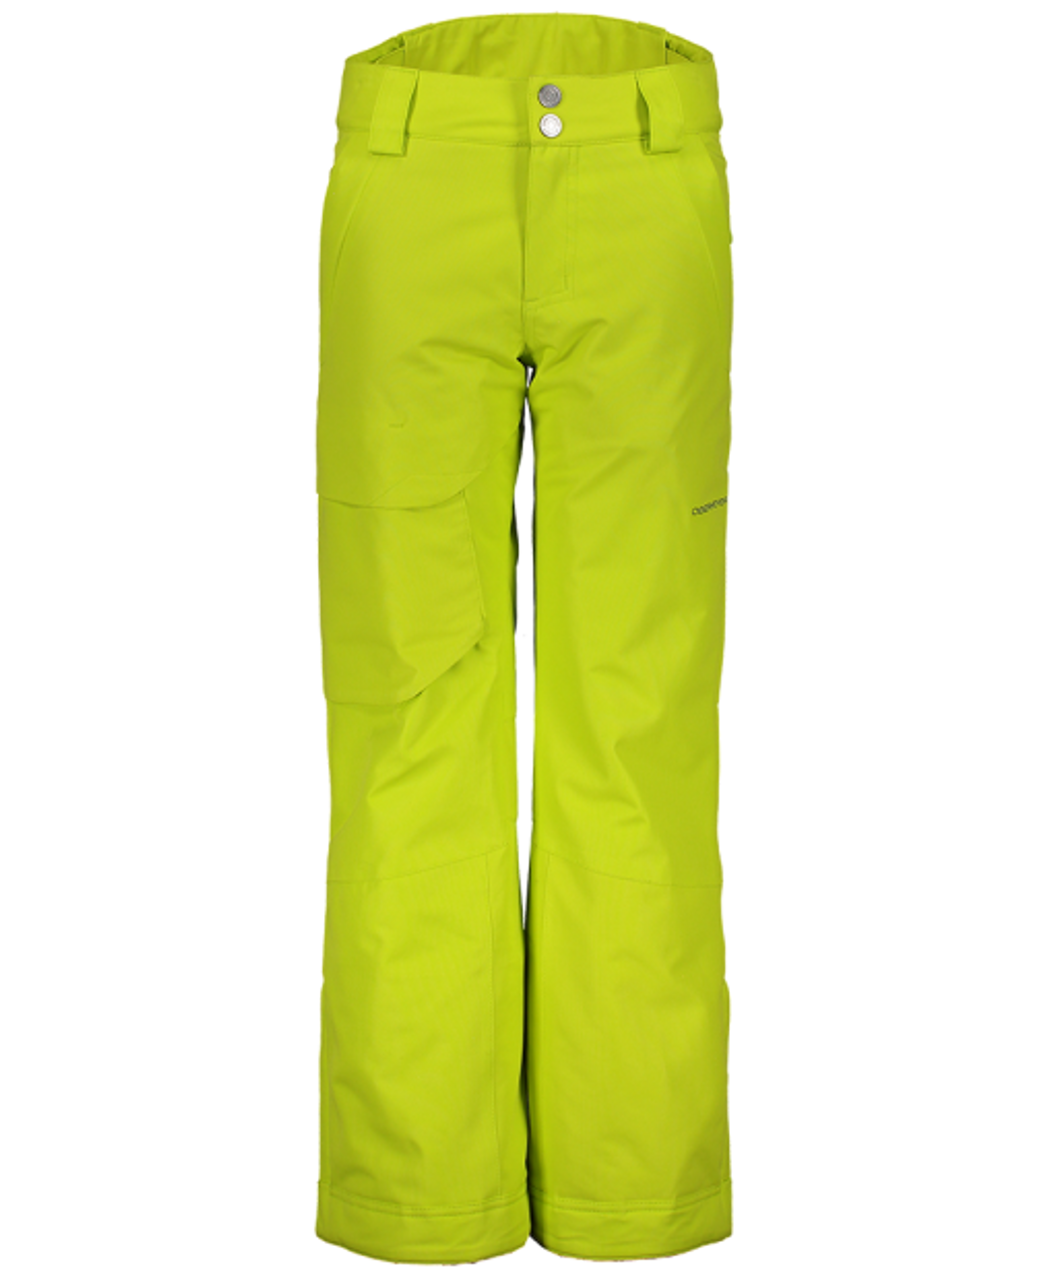 LIMELIGHT WINTER TROUSERS NEW ARRIVALS 2019 - YouTube